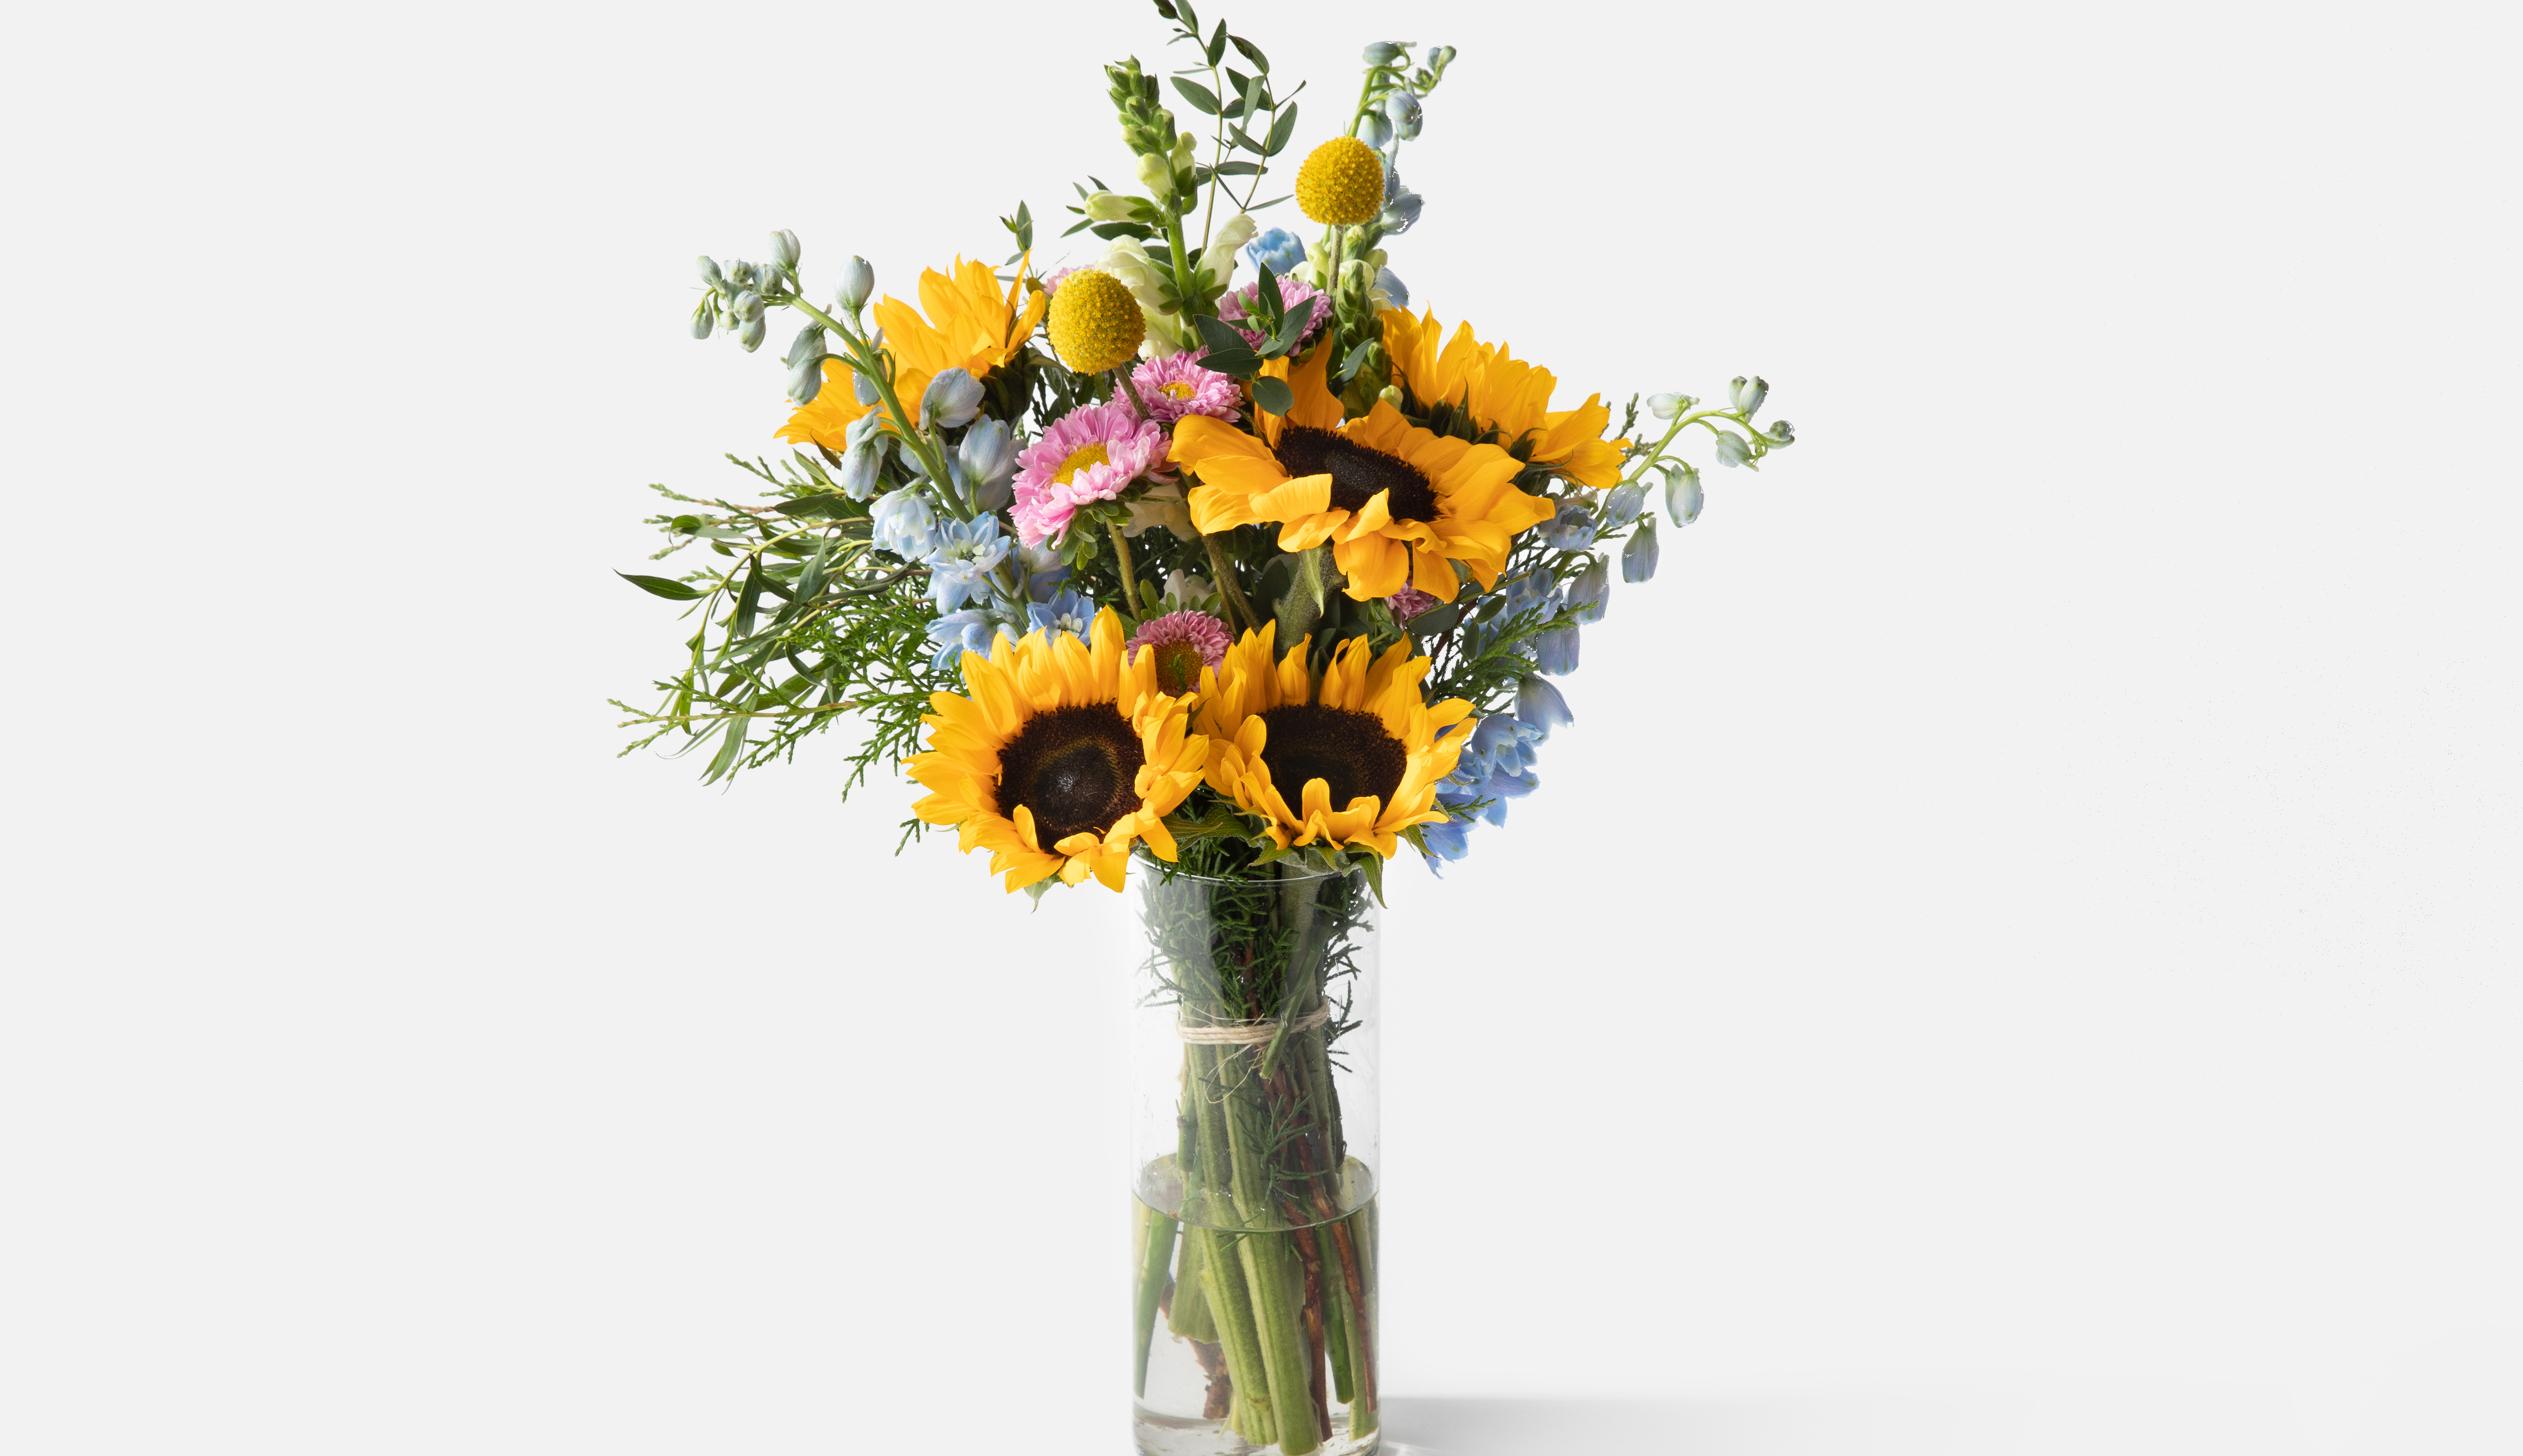 Bouquet with sunflowers and other florals in glass vase.